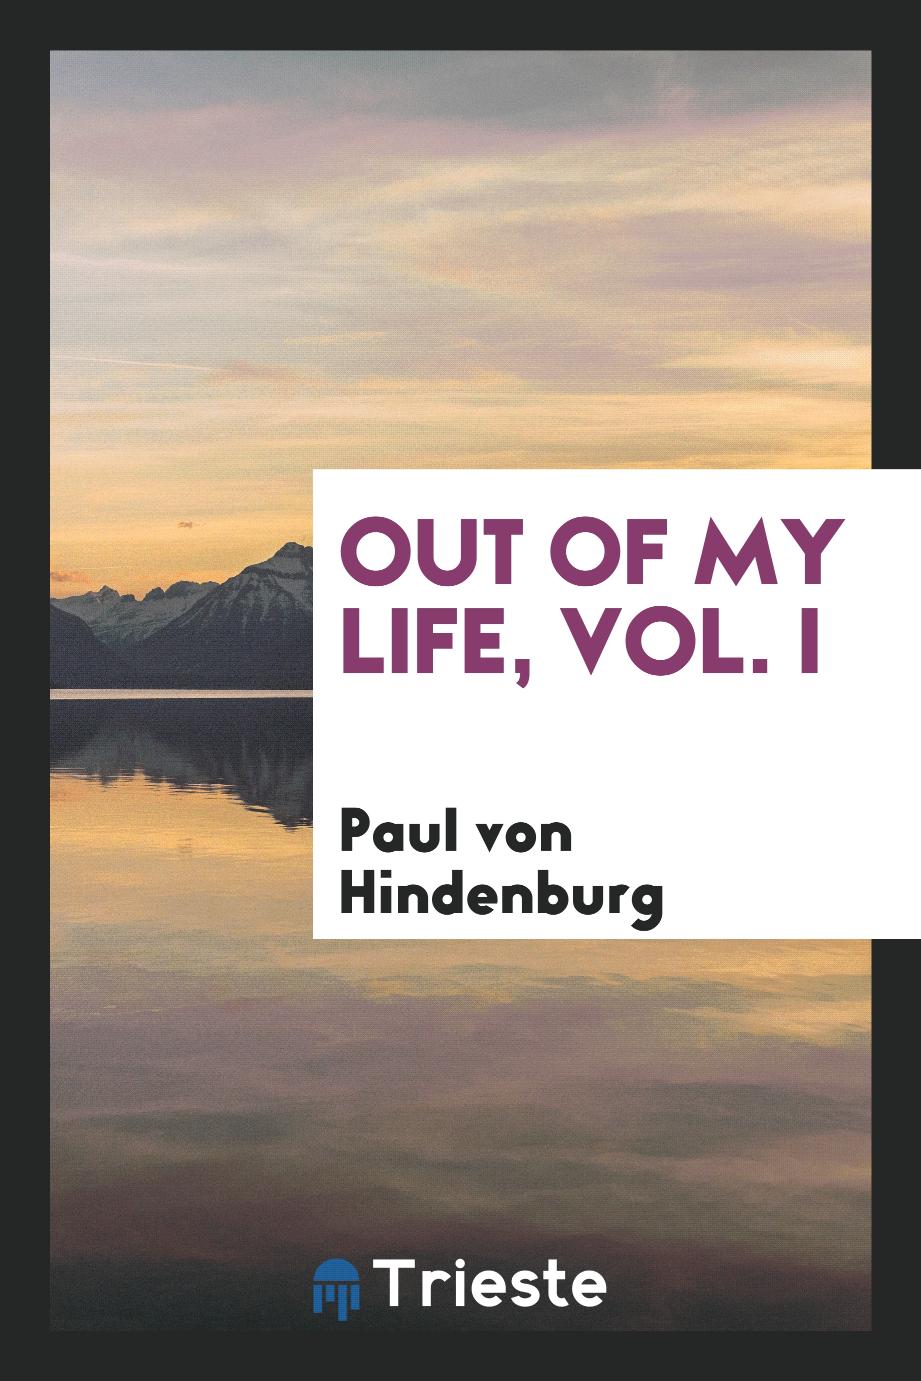 Out of my life, Vol. I